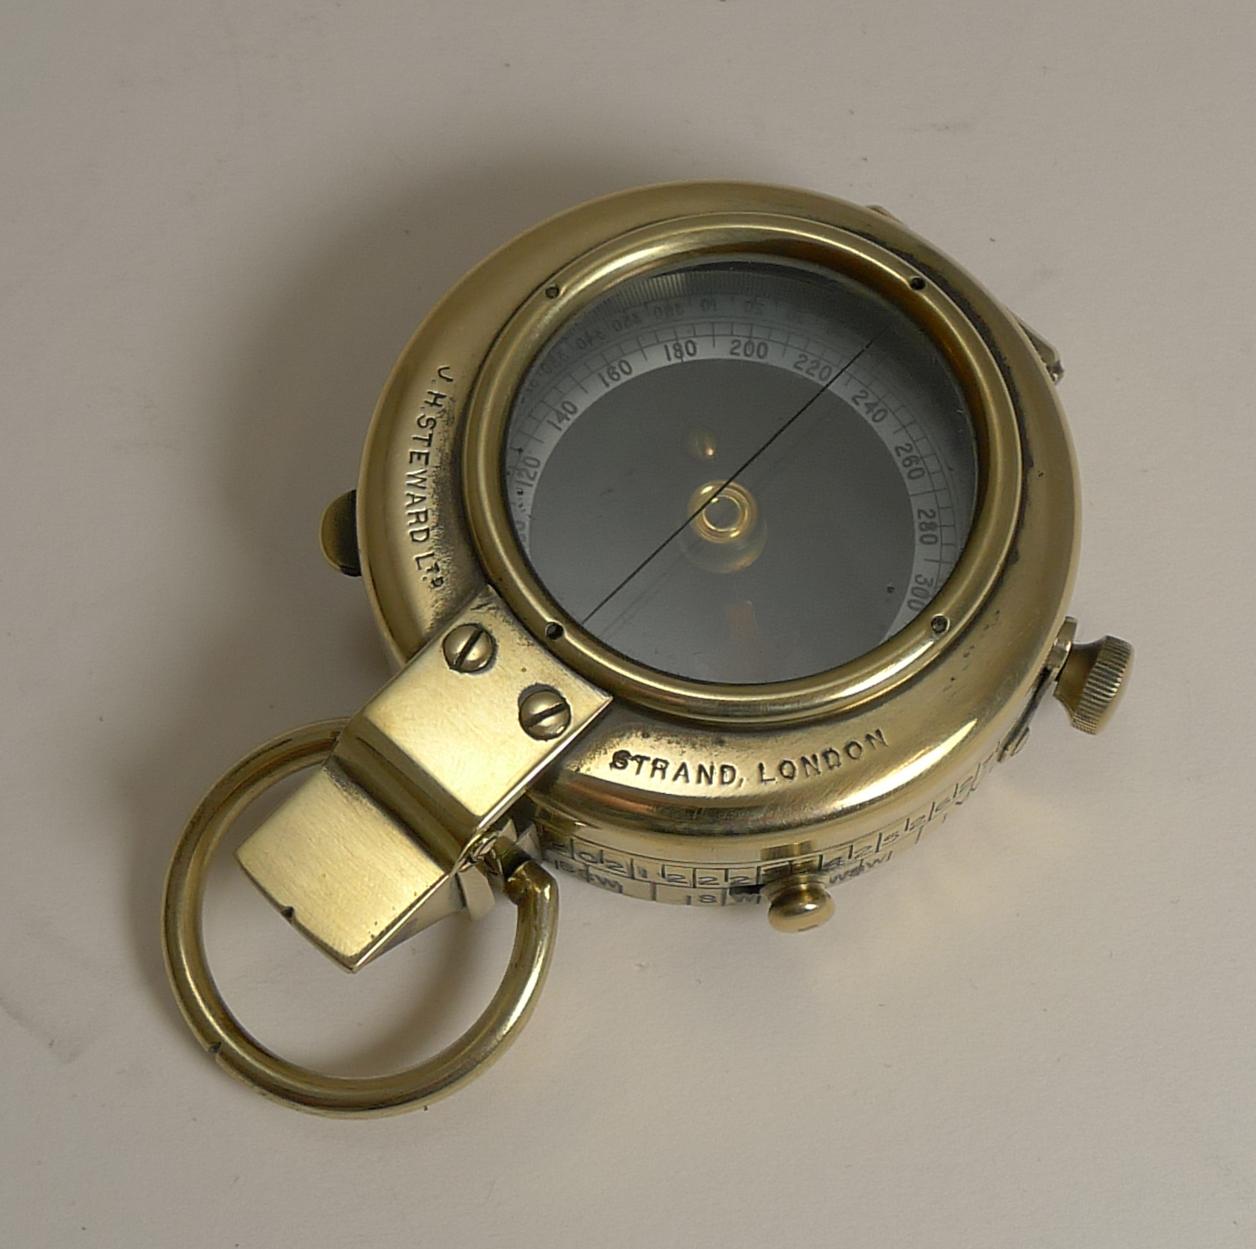 WWI 1918 British Army Officer's Compass by J H Steward, London 2